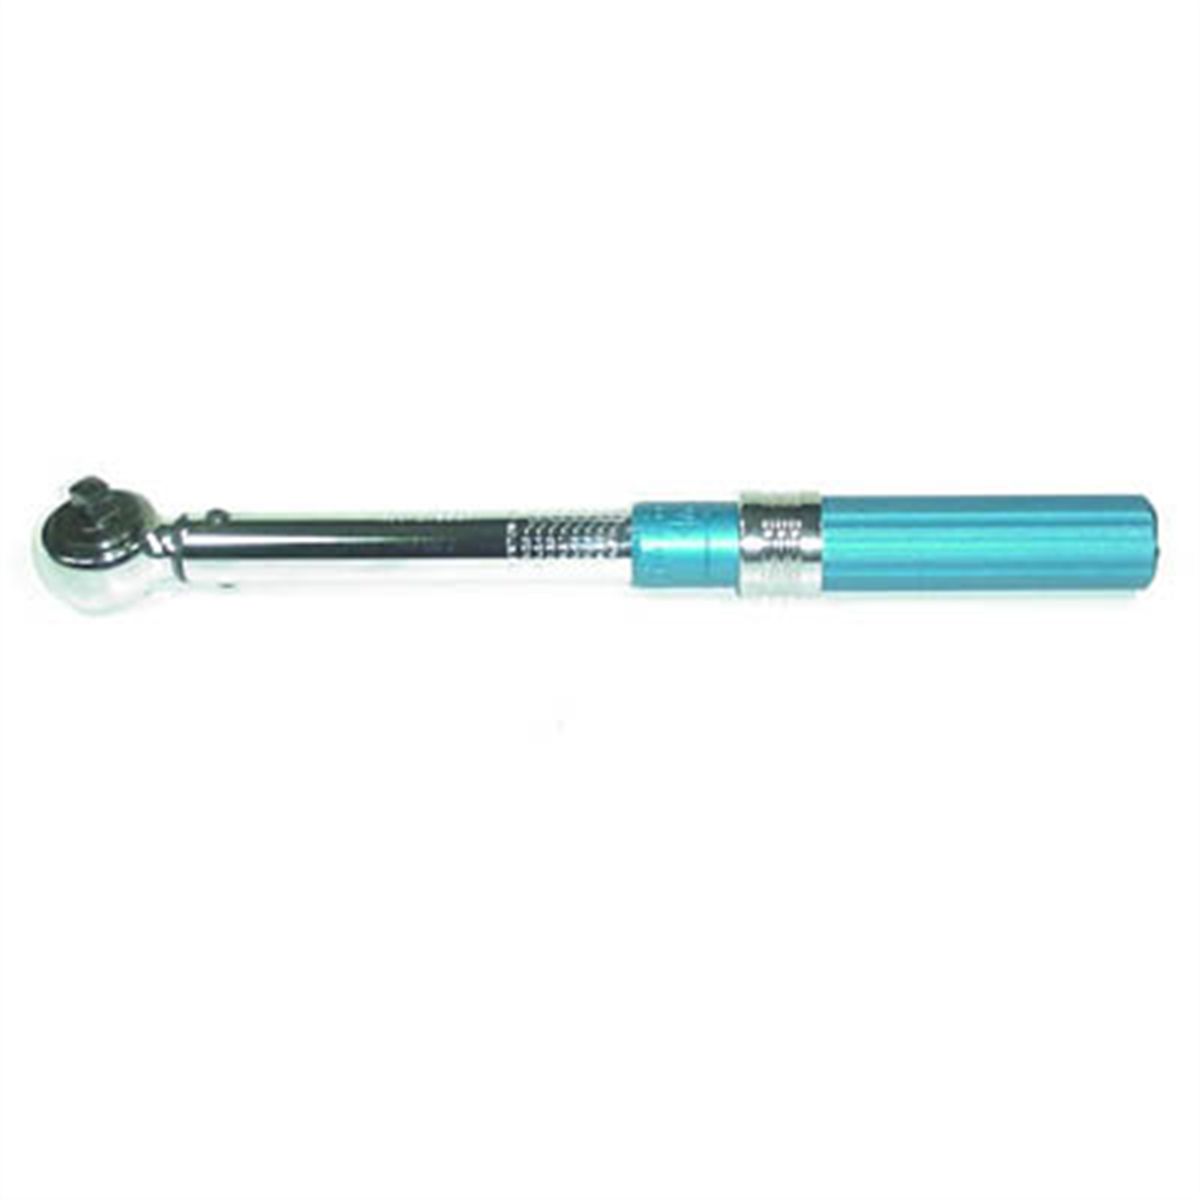 Apex Tool Group 3/8 Dr Torque Wrench 10-100 